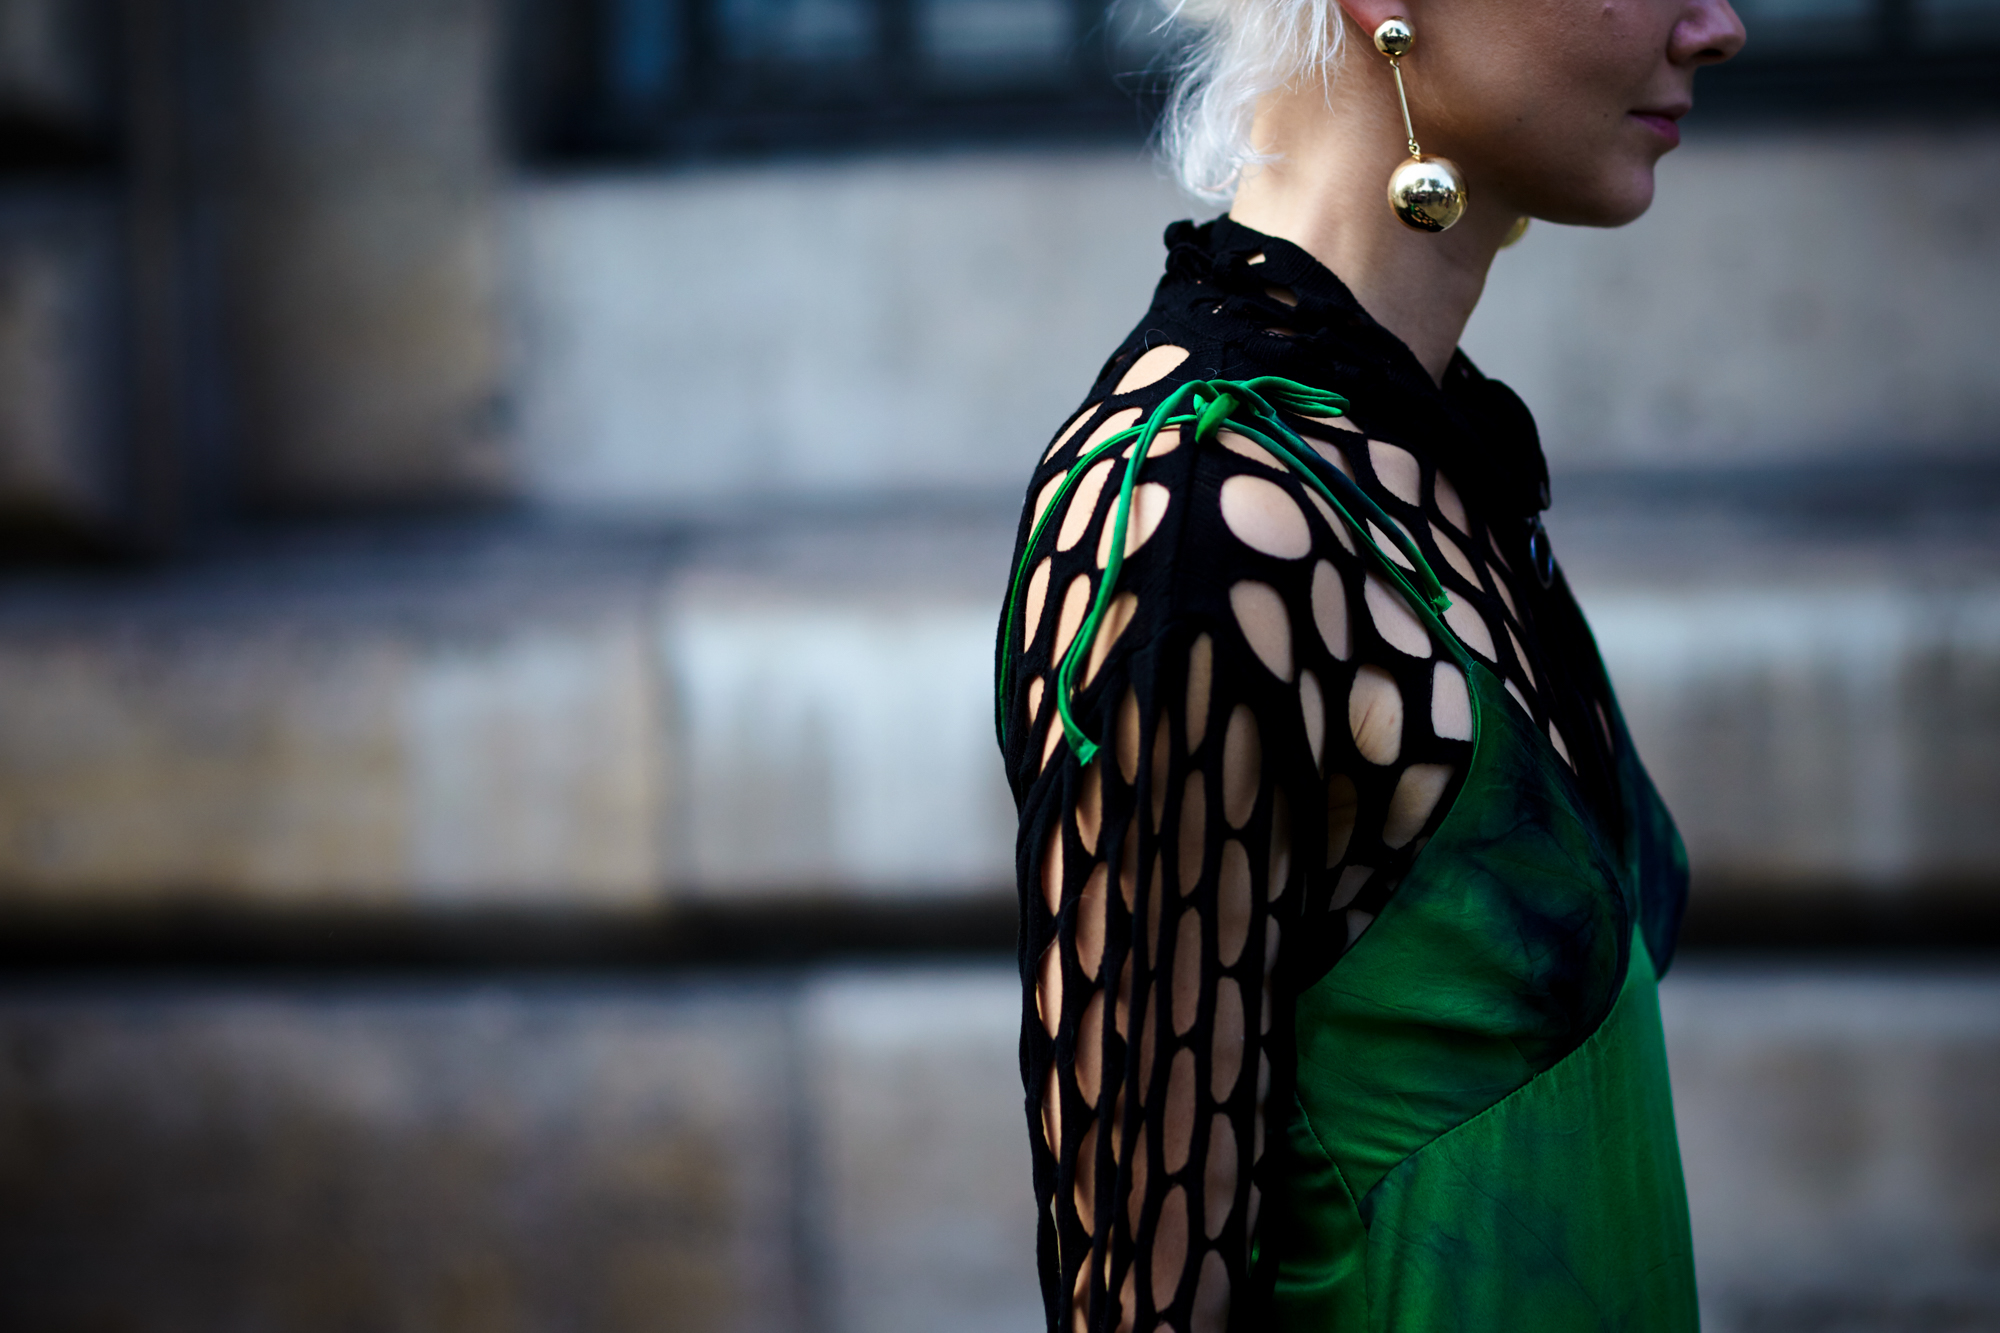 PFW Spring-Summer 2017 Street Style: Olga Karput wearing a green Marques Almeida dress and J.W.Anderson earrings after the Courreges fashion show in Paris